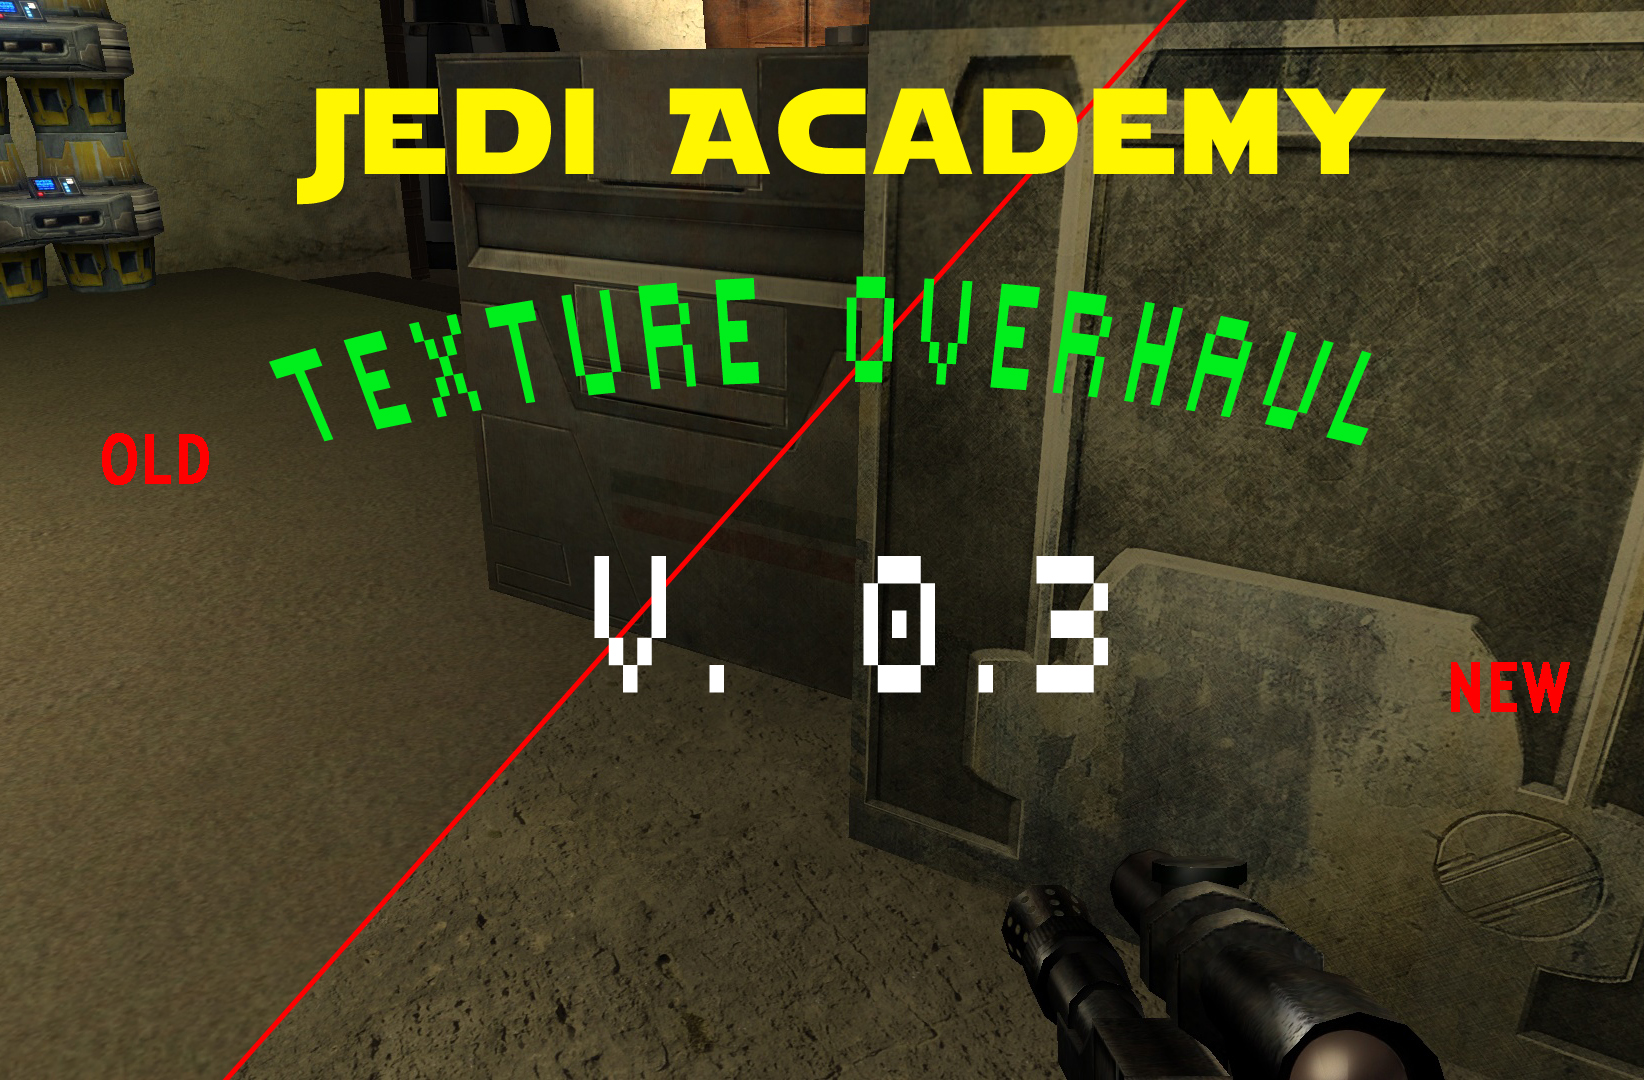 More information about "The Jedi Academy Texture Overhaul Full"